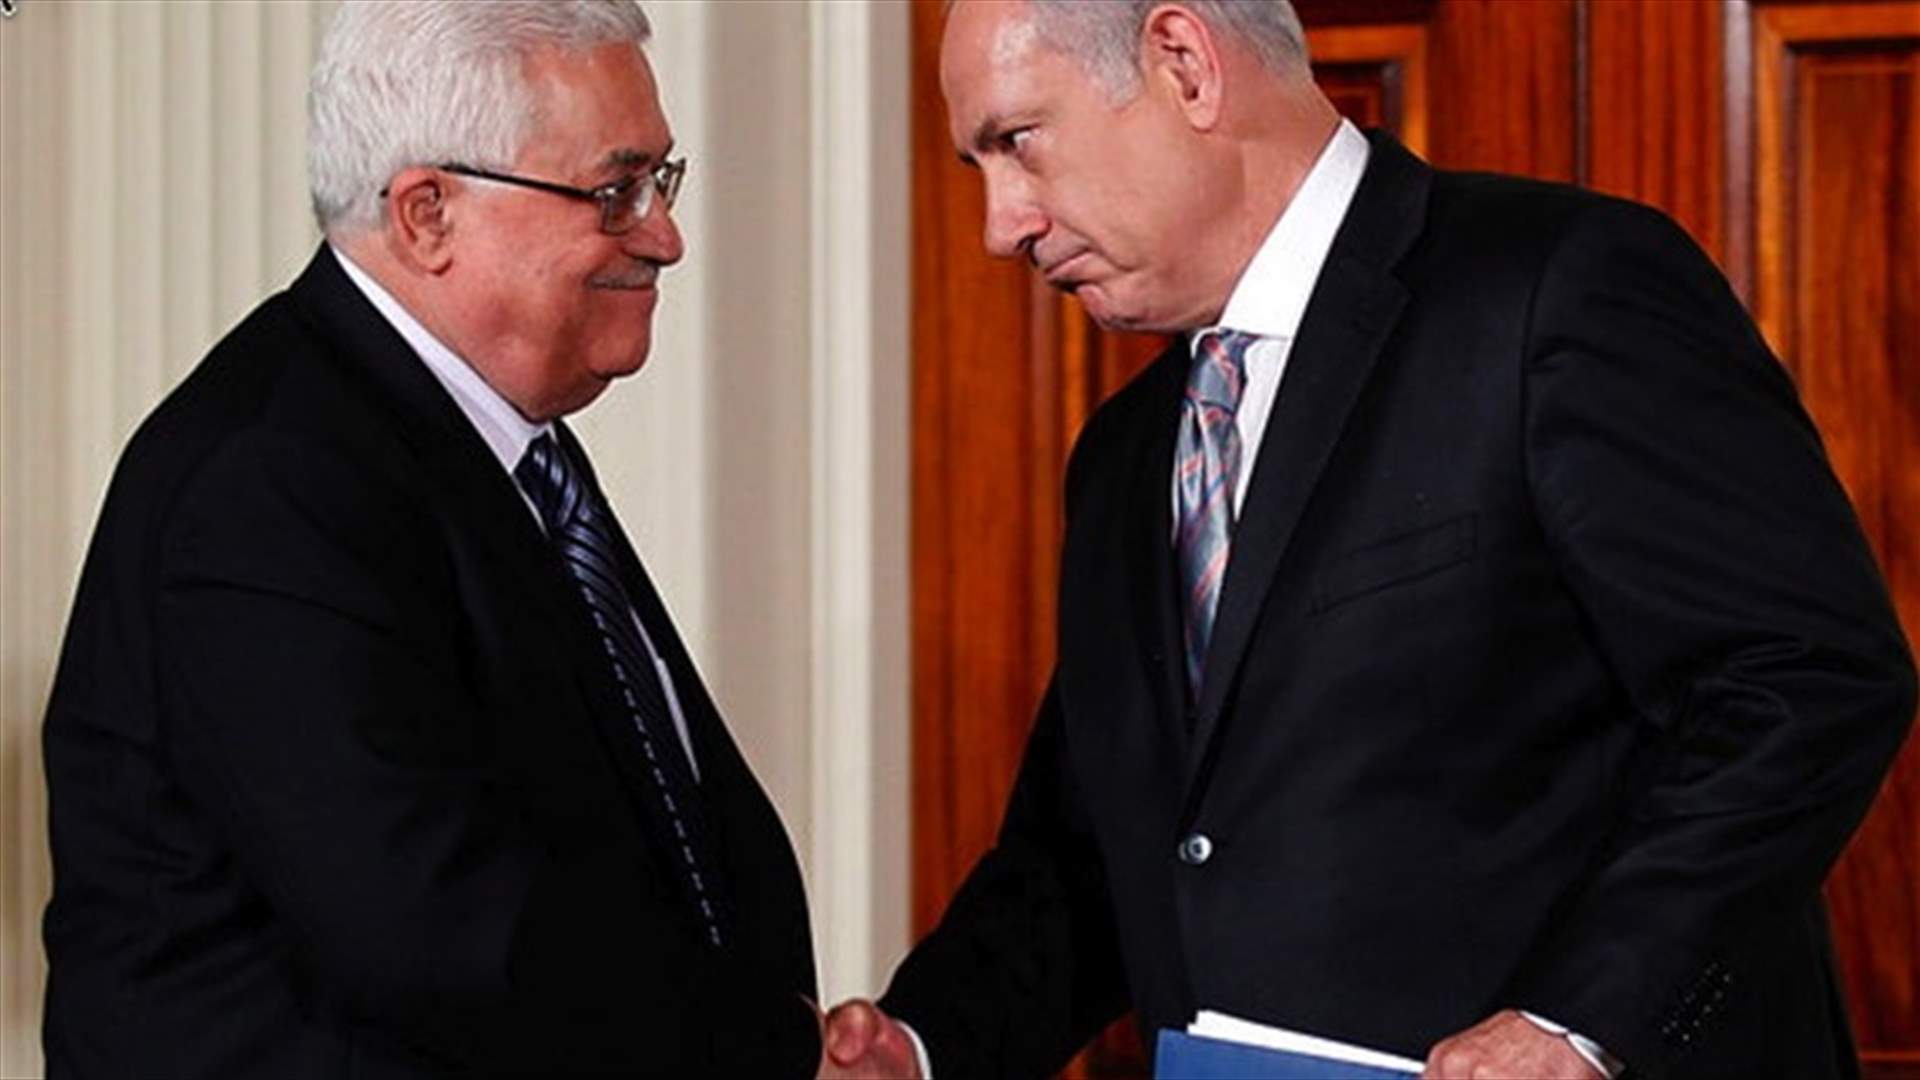 Palestine&#39;s Abbas agrees to Moscow talks with Israel&#39;s Netanyahu - Ifax